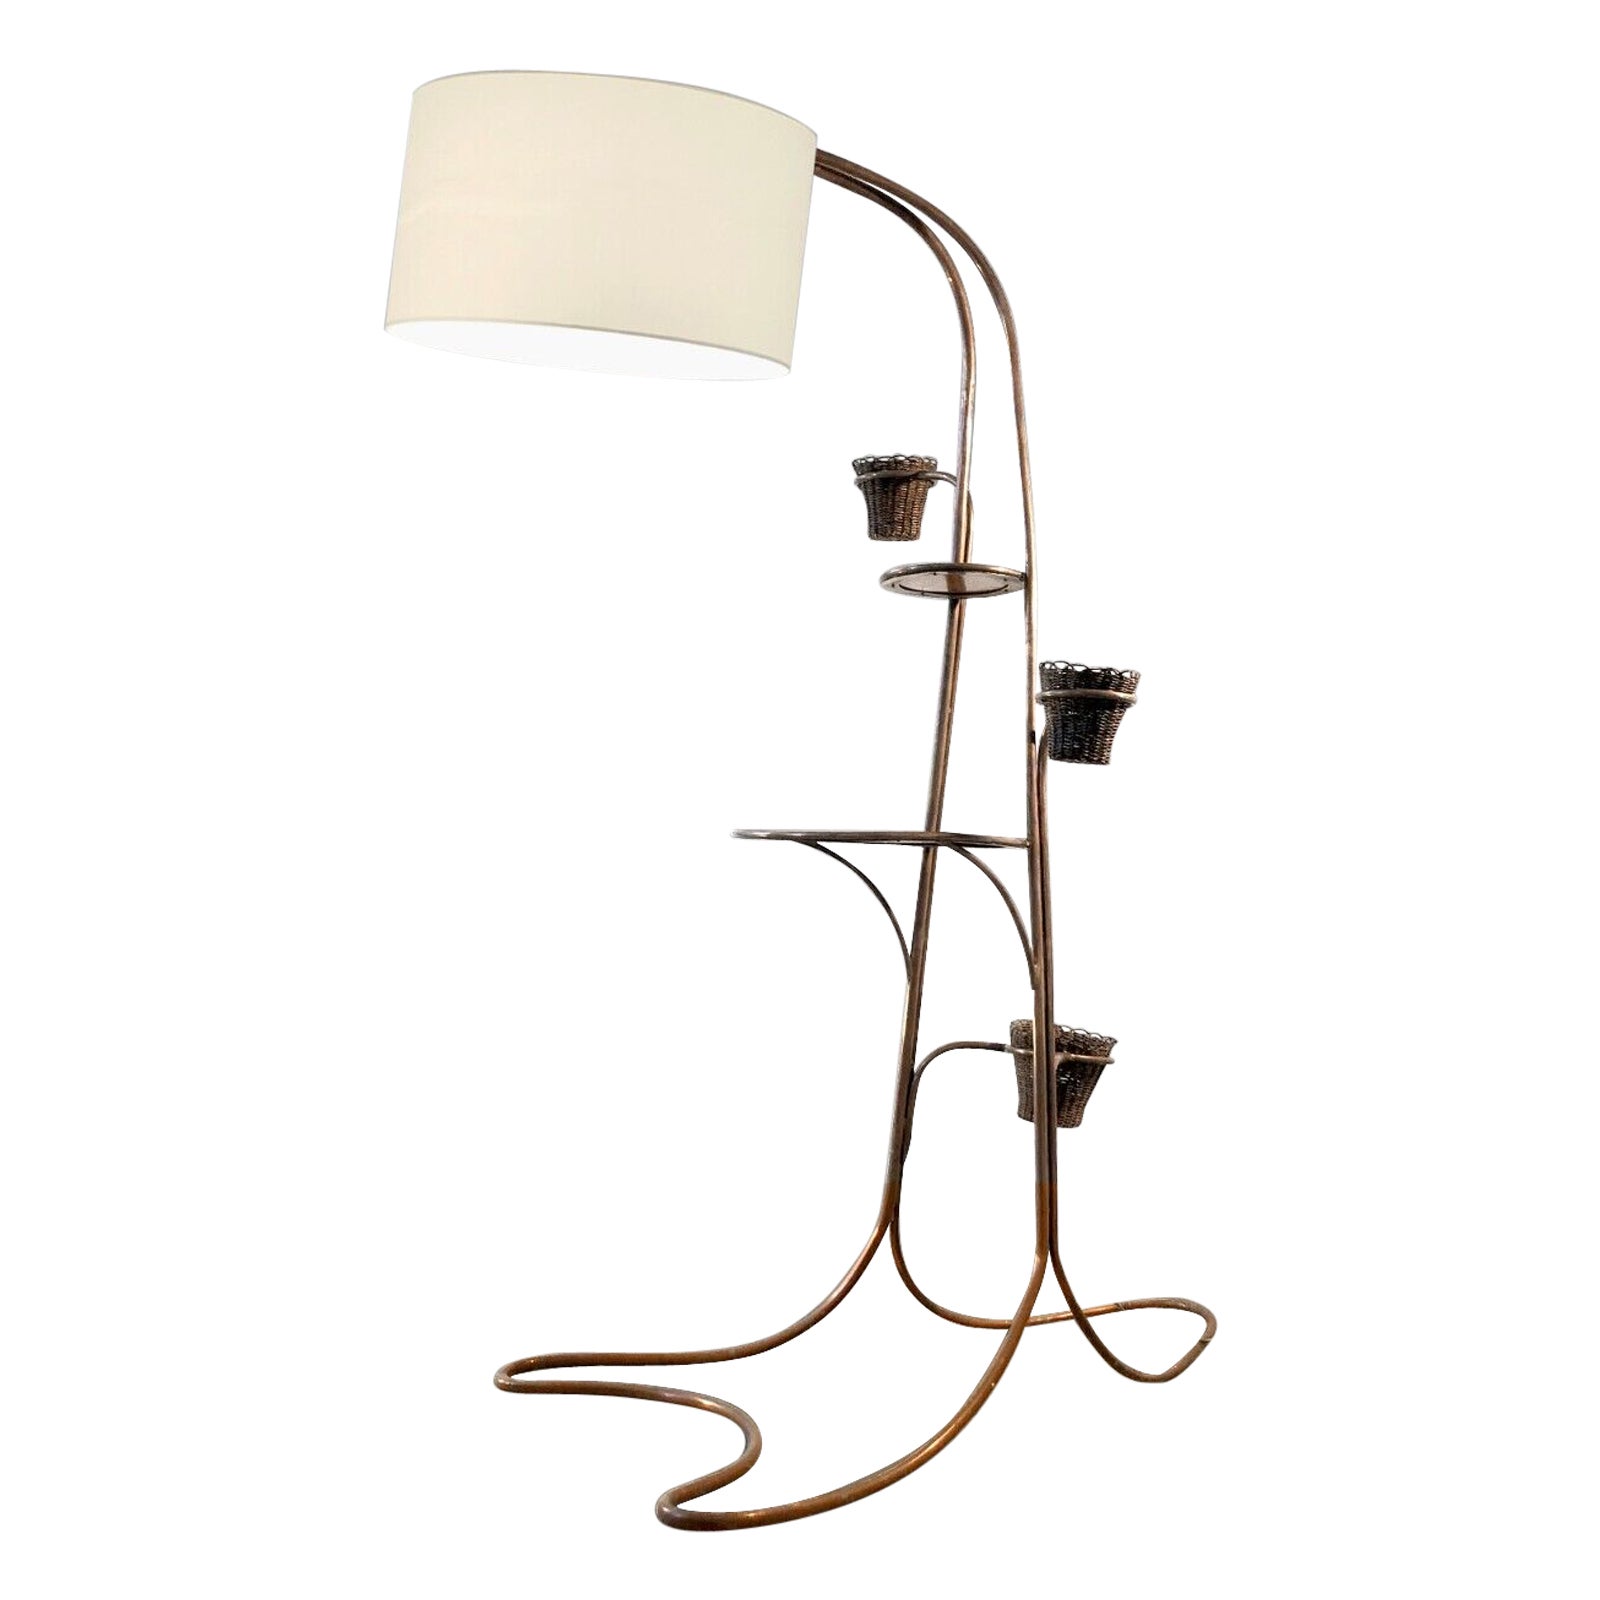 A SPECTACULAR SCULPTURAL MID-CENTURY-MODERN FREE-FORM FLOOR LAMP, France 1950 For Sale